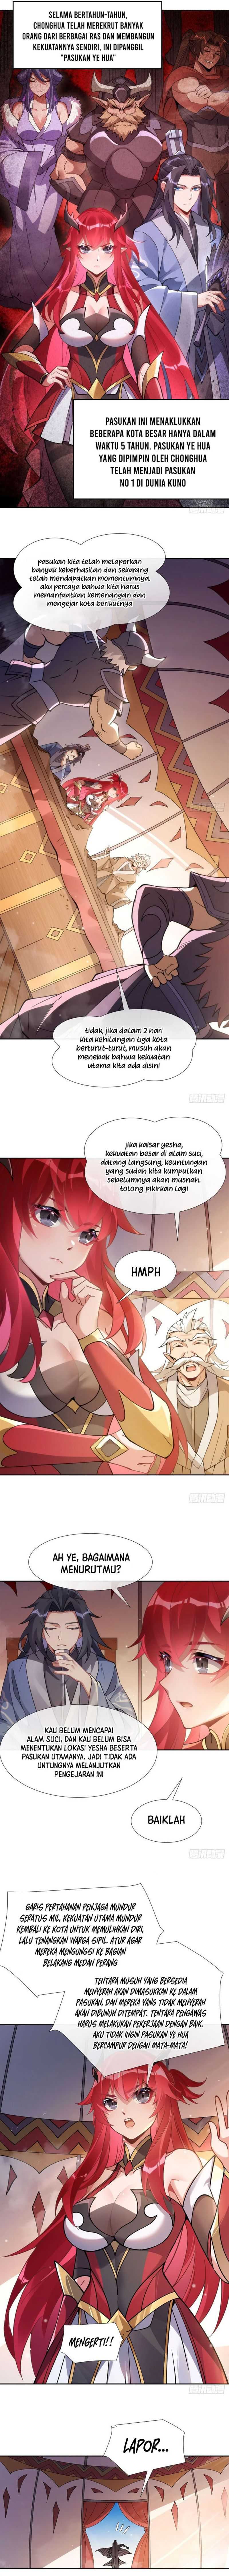 Dilarang COPAS - situs resmi www.mangacanblog.com - Komik my female apprentices are all big shots from the future 152 - chapter 152 153 Indonesia my female apprentices are all big shots from the future 152 - chapter 152 Terbaru 8|Baca Manga Komik Indonesia|Mangacan